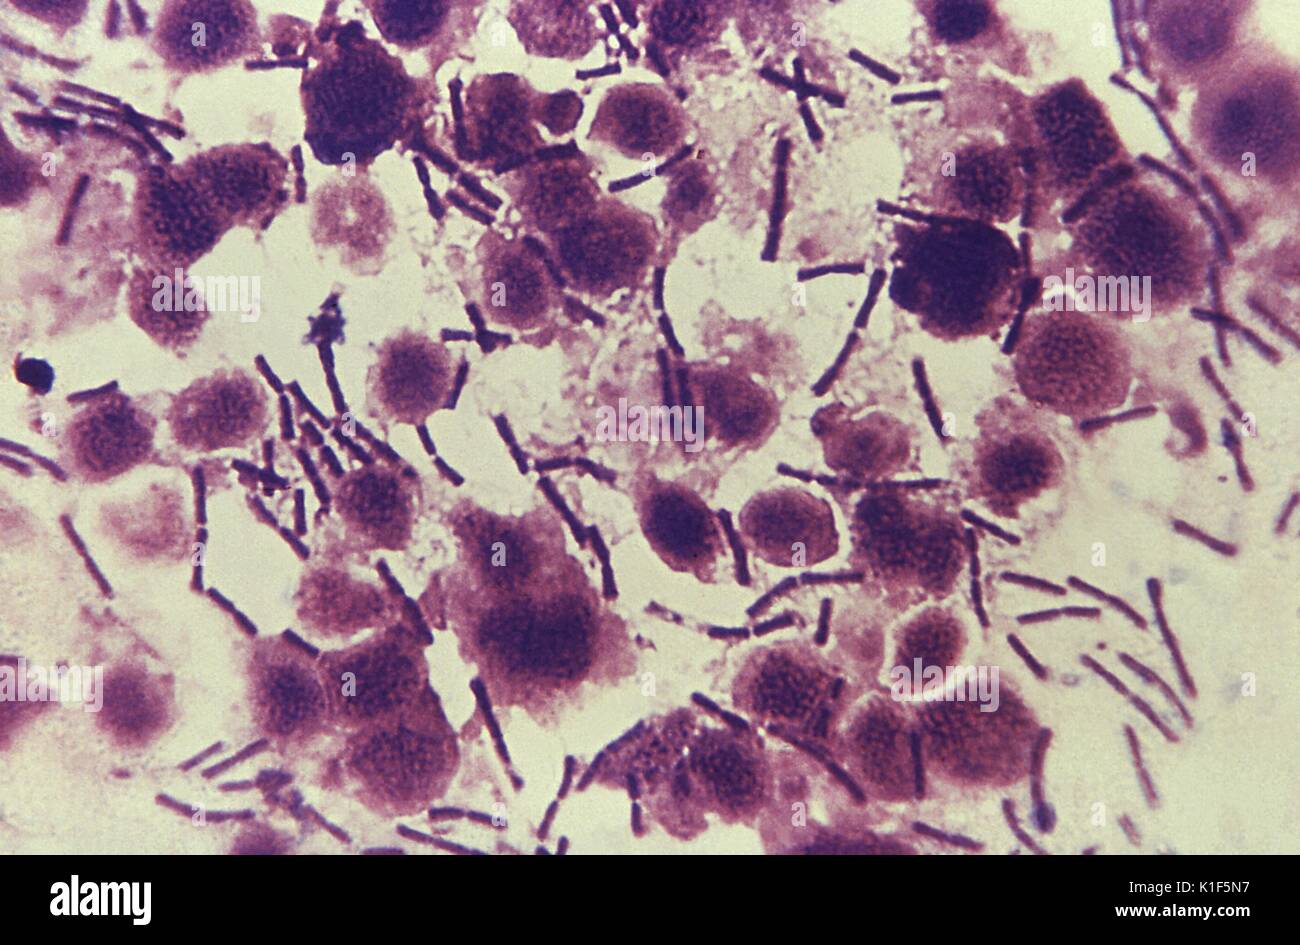 This photomicrograph reveals numerous rod-shaped Bacillus anthracis bacteria, some that had linked together to form chains, while others remained solitary. Anthrax is a naturally-occurring disease of animals (e.g. sheep, goats, and cattle) caused by the bacterium Bacillus anthracis . The bacteria live in the soil in many parts of the world and form protective outer coats called spores (hereafter called anthrax spores). Spores are able to withstand harsh or adverse conditions that would normally kill bacteria. Animals can get anthrax by ingesting anthrax spores from the soil. Anthrax in animals Stock Photo